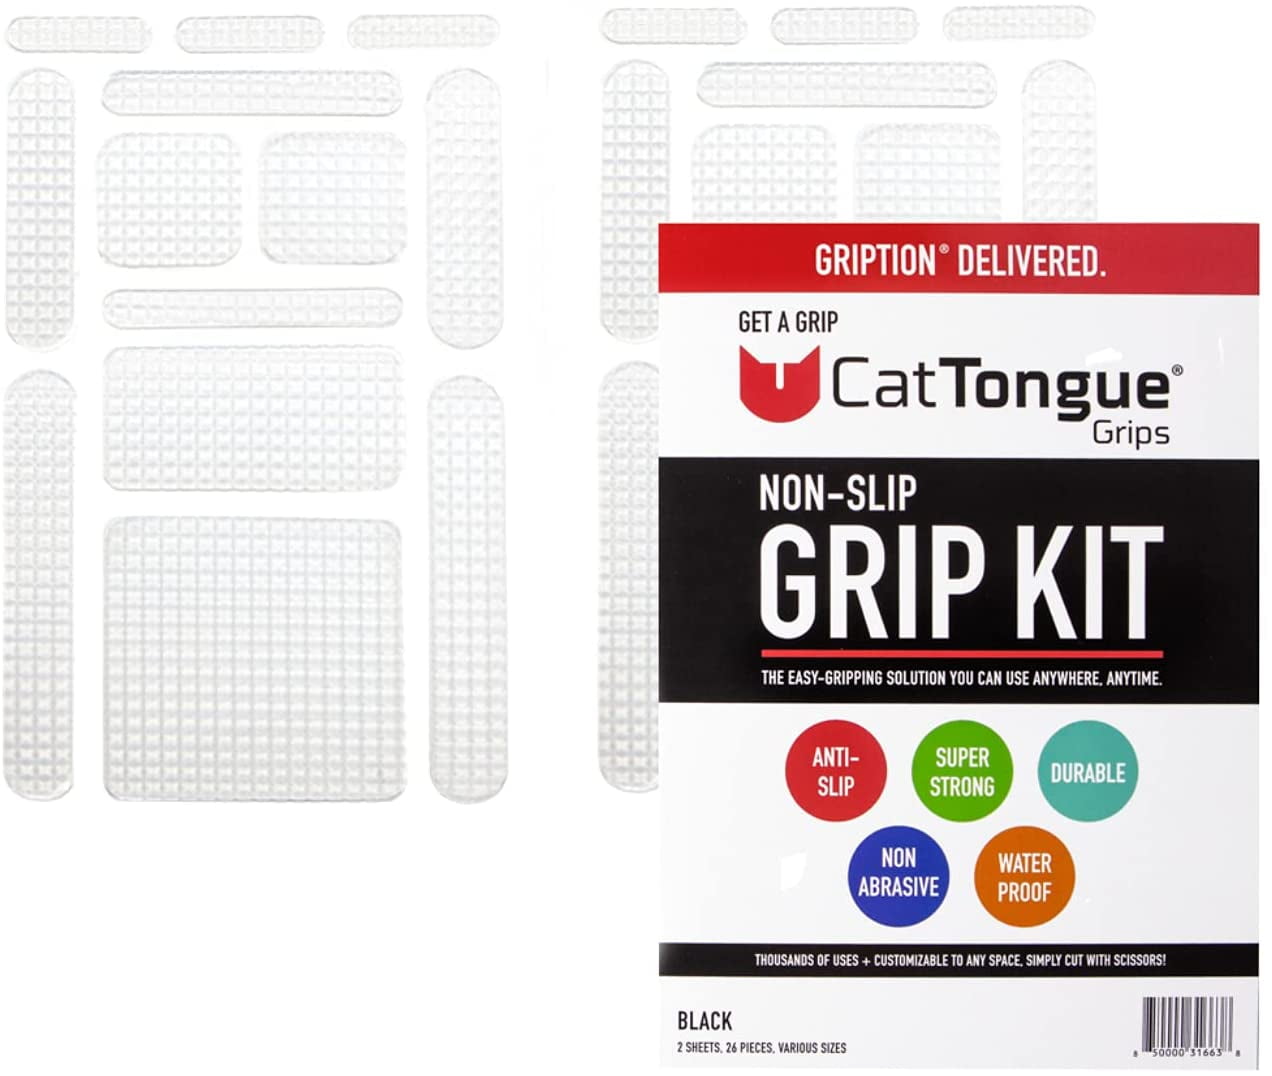 26 pcs – Waterproof Non-Slip Grip Tape Kit for Indoor & Outdoor Use Bathtubs Black Non-Abrasive Grip Kit by CatTongue Grips Thousands of Grippy Uses: Furniture Controllers and More! Frames